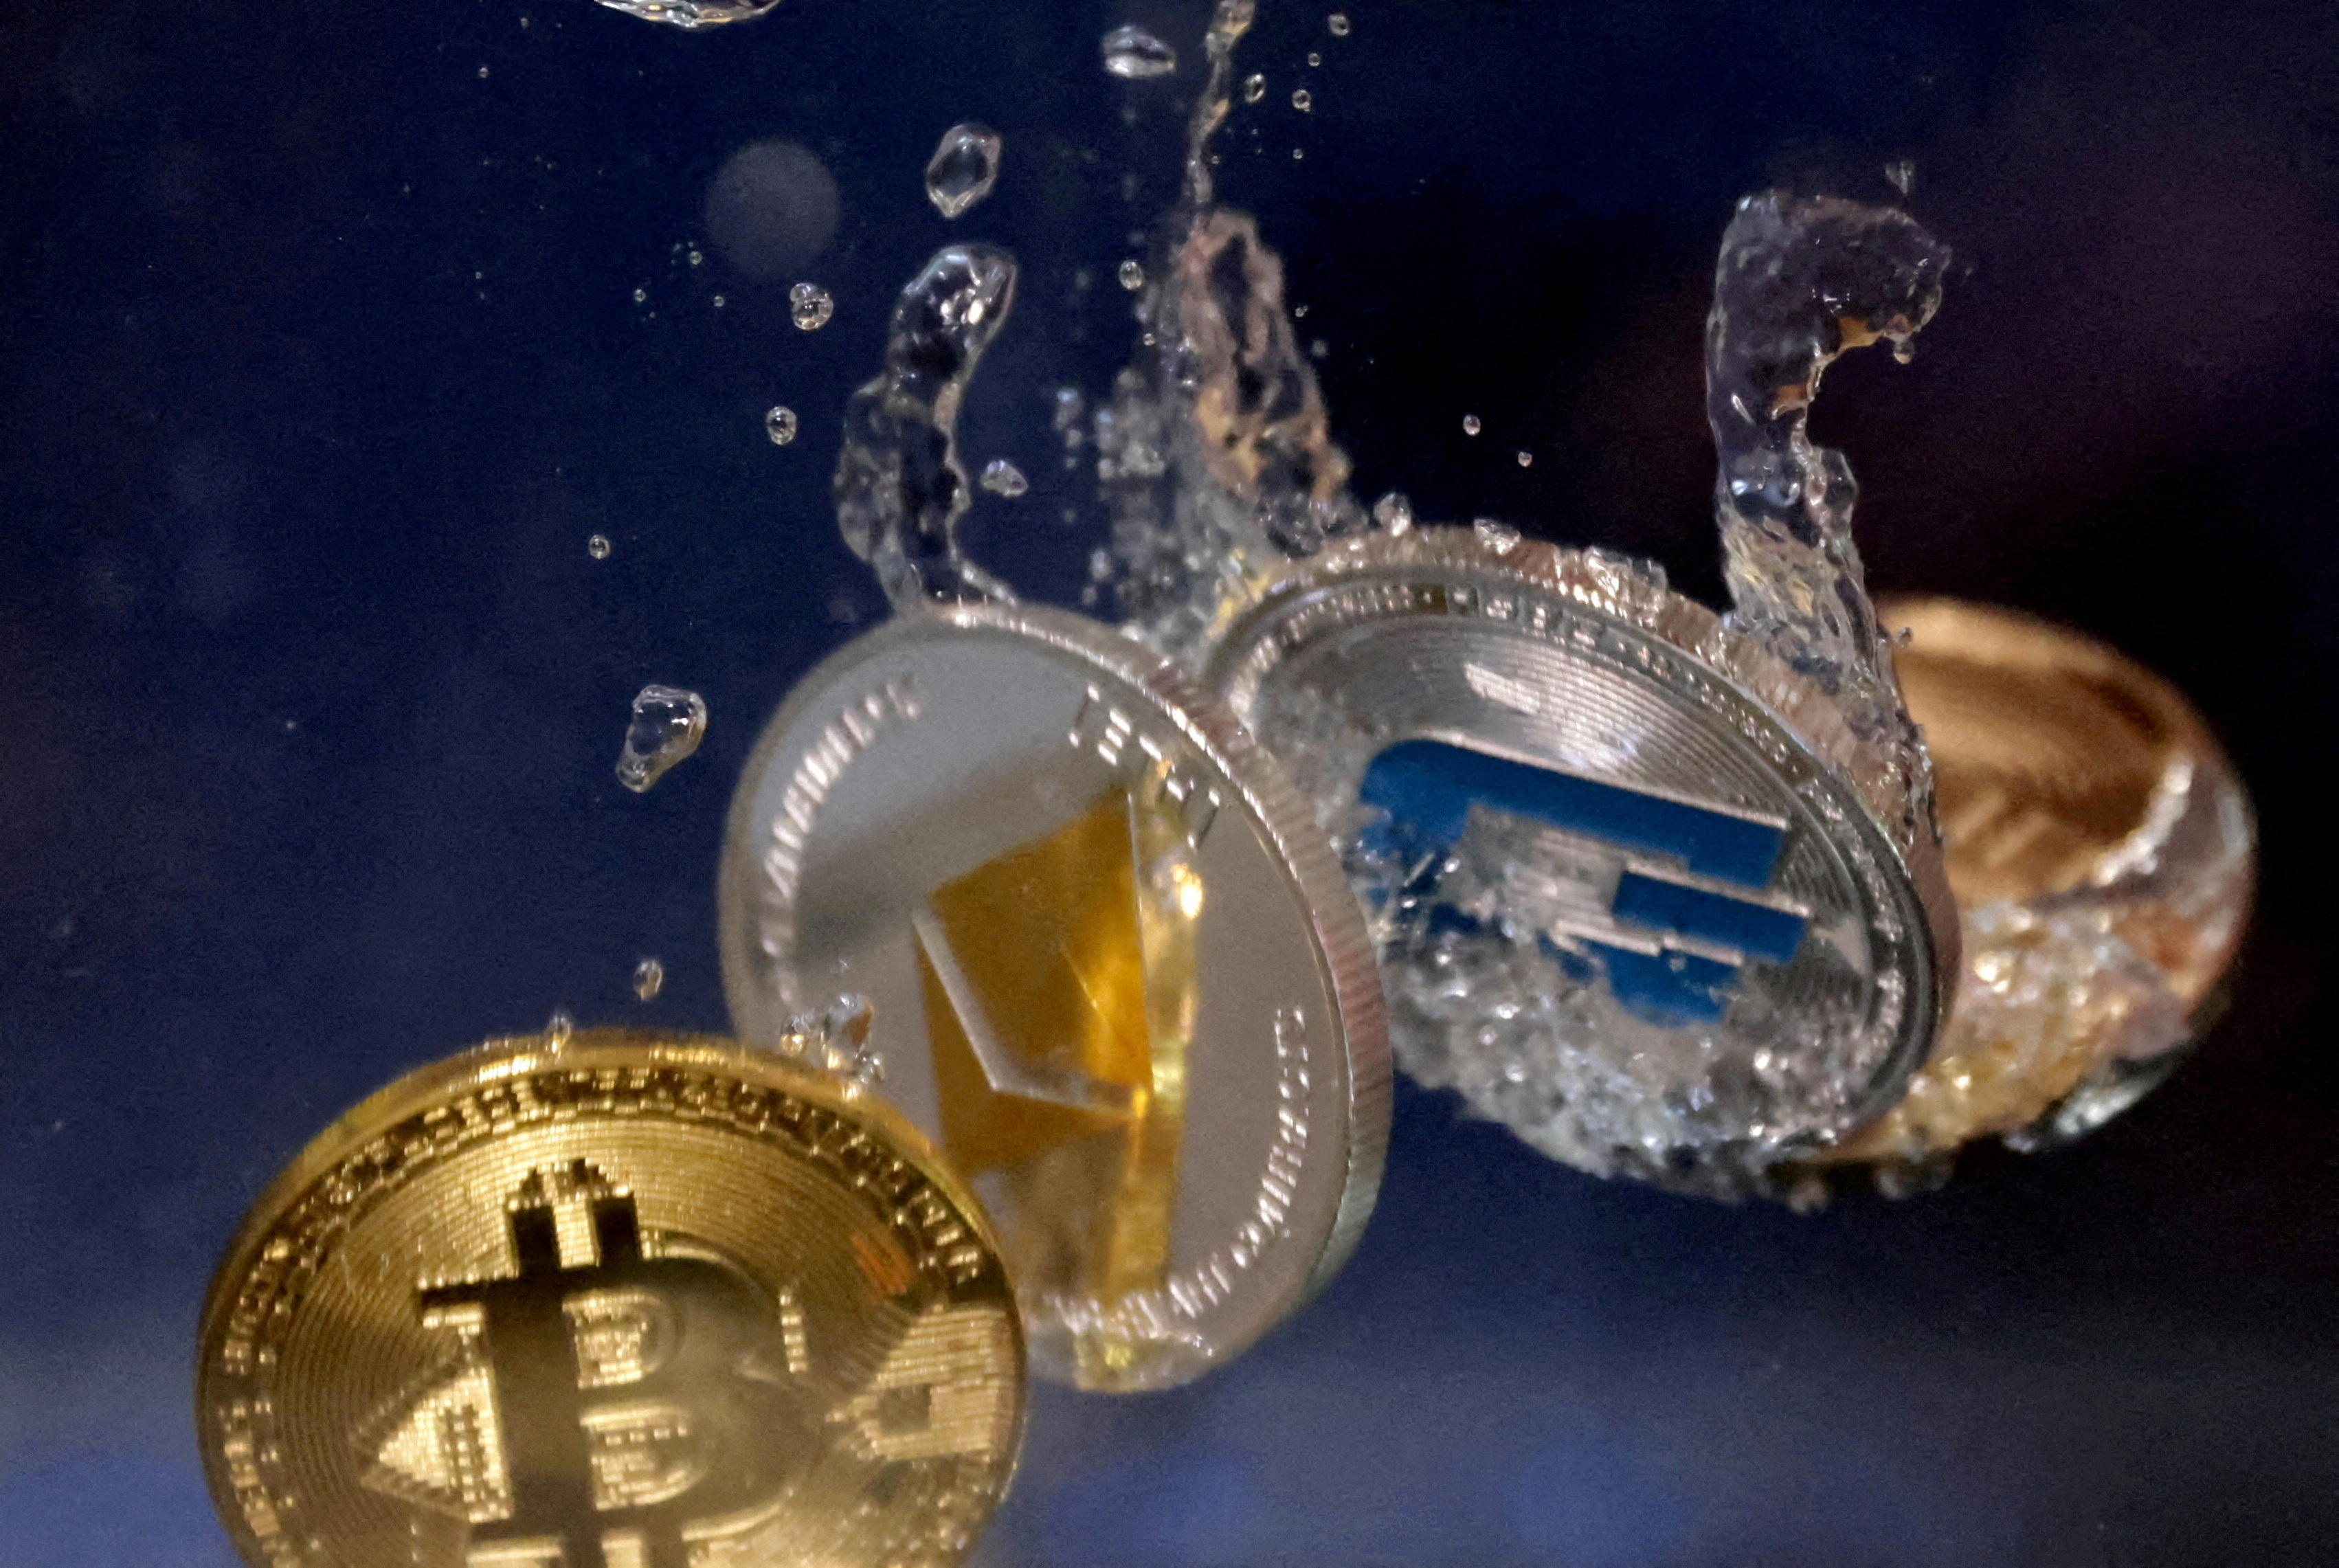 Illustration shows representation of cryptocurrency jumping into water